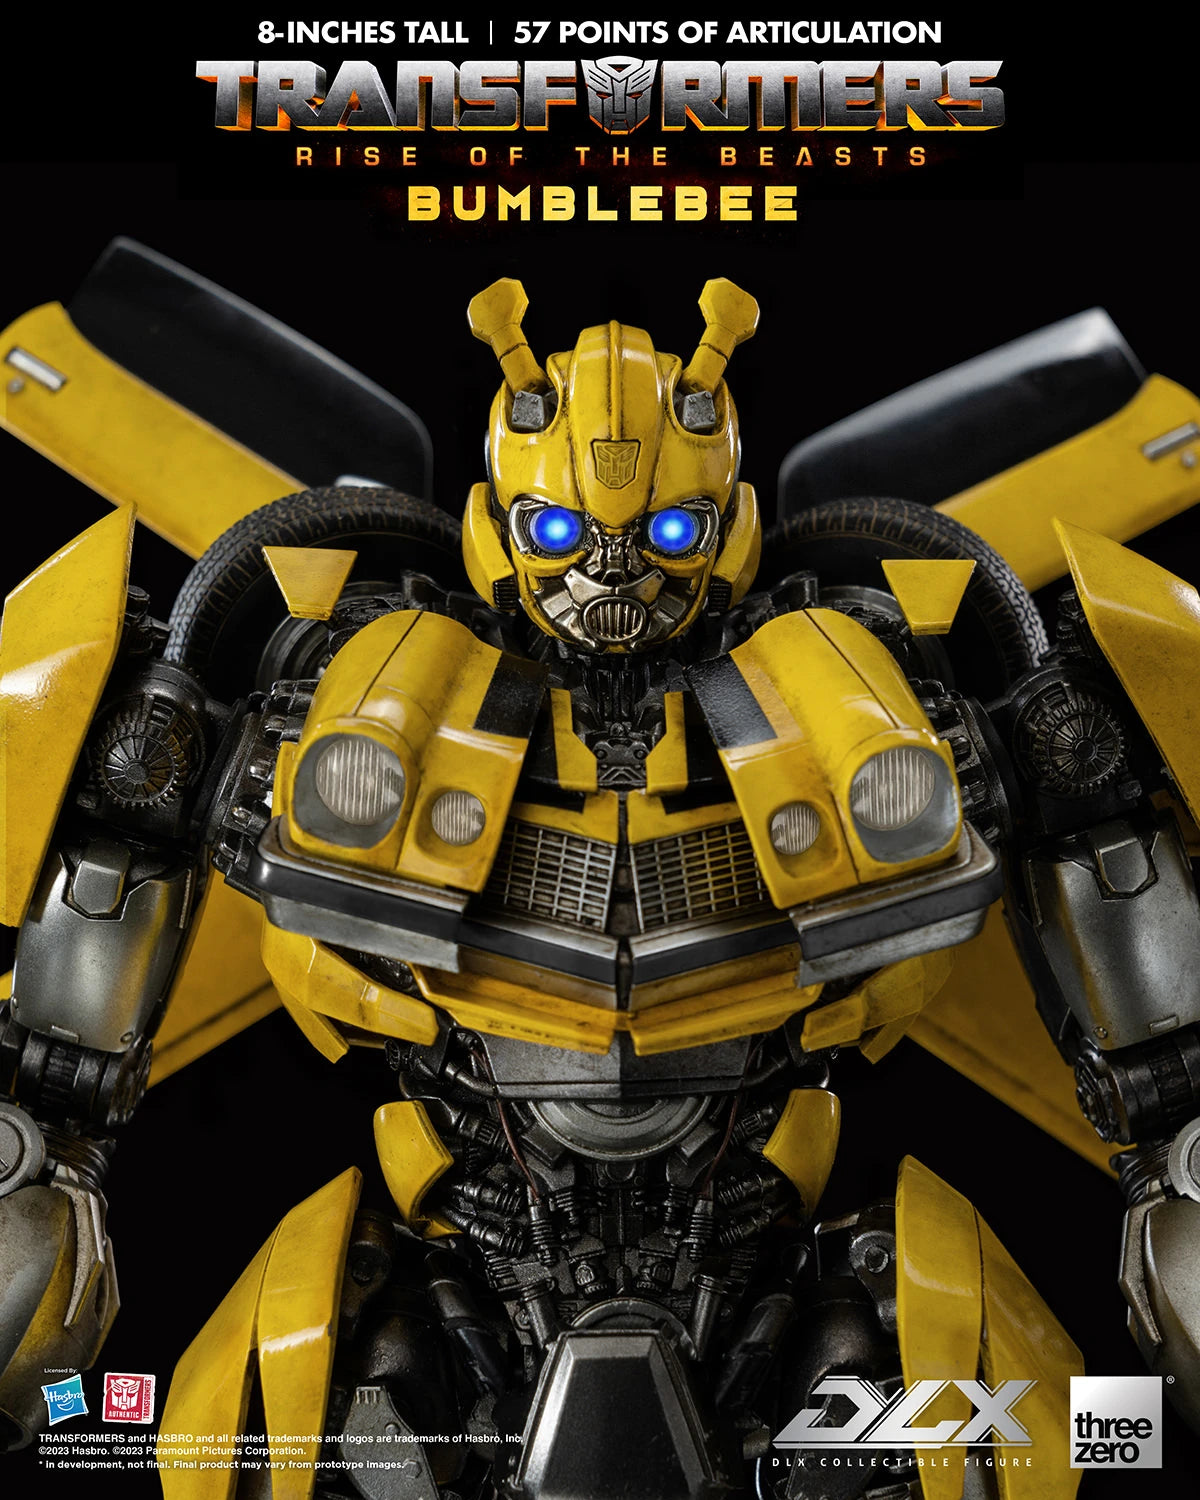 Threezero Collectible Figure: Transformers Rise of the Beasts - Bumblebee Deluxe